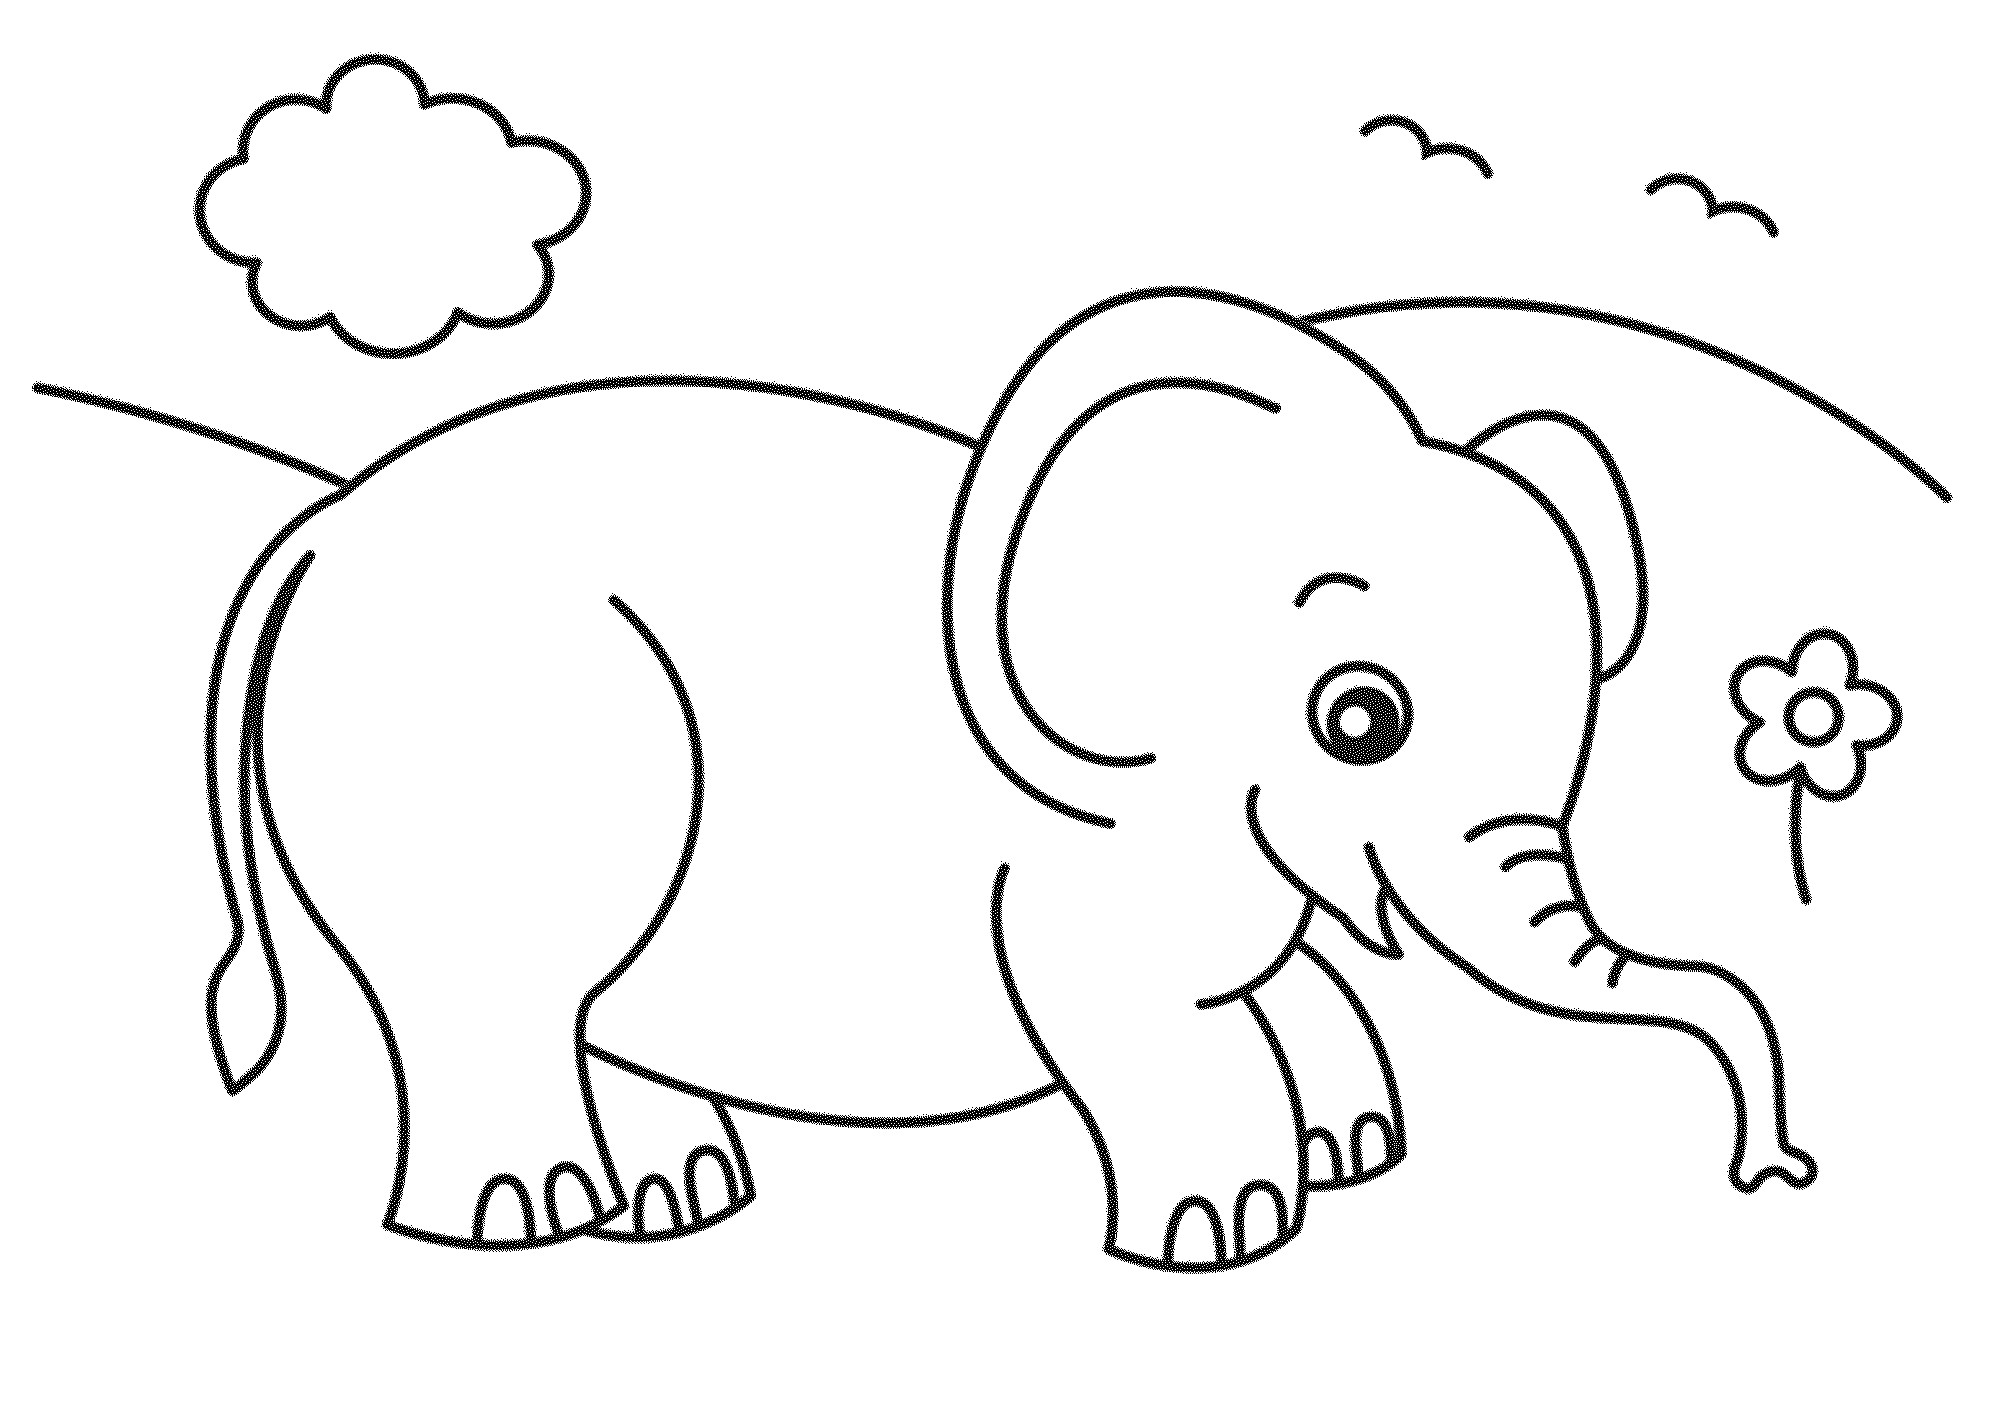 Baby Elephant Coloring Pages
 Print & Download Teaching Kids through Elephant Coloring